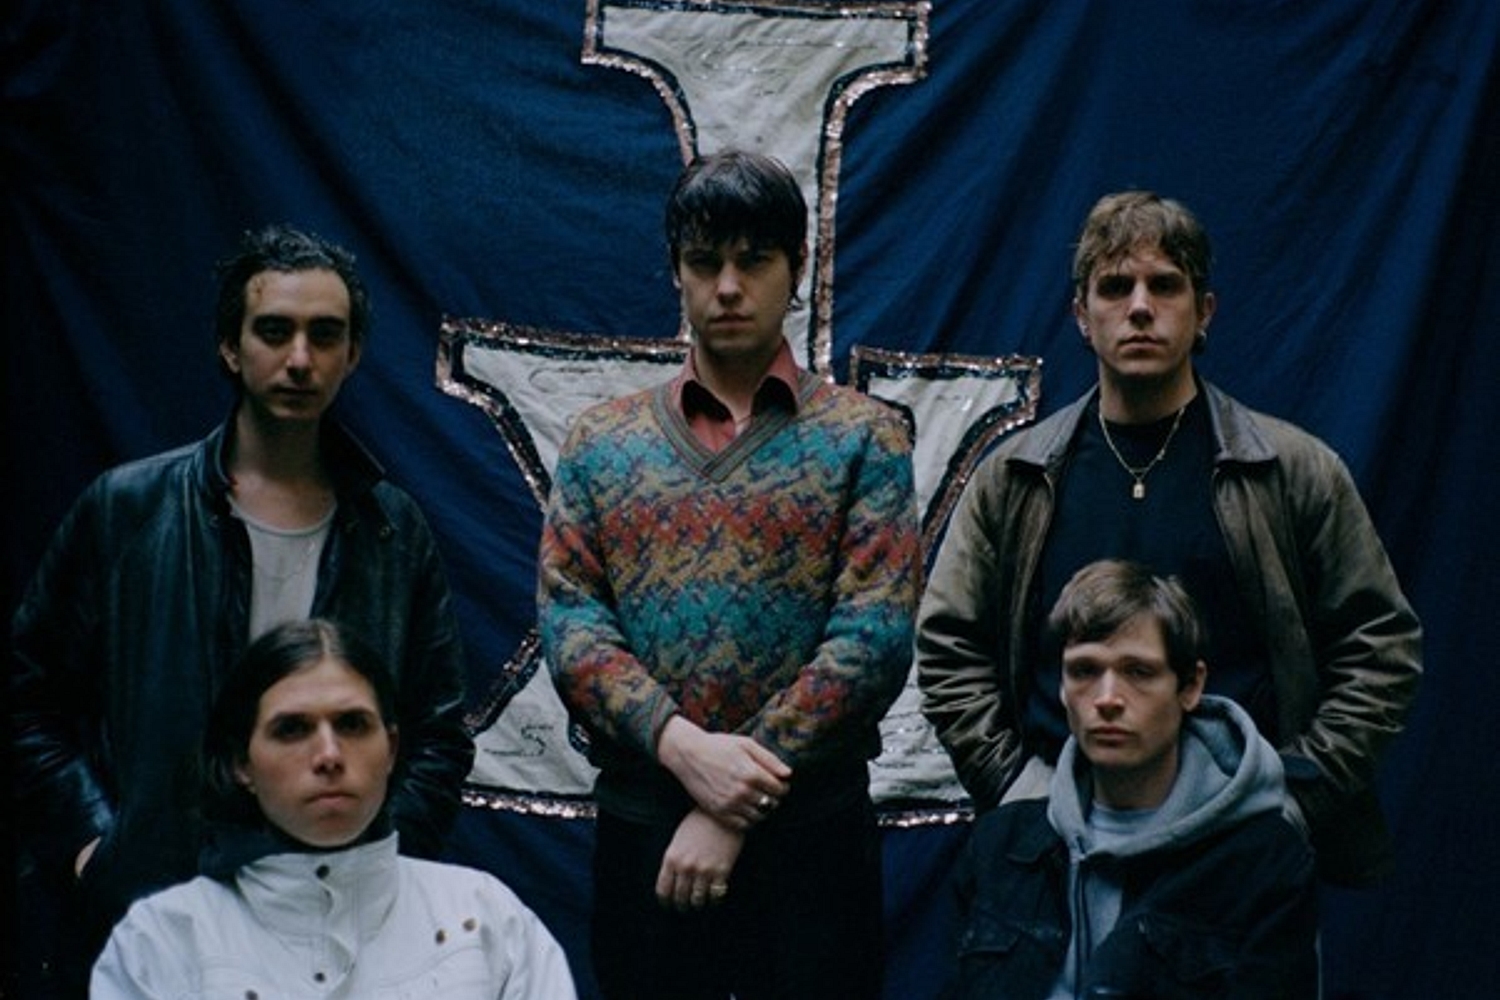 Iceage release new track ‘Gold City’